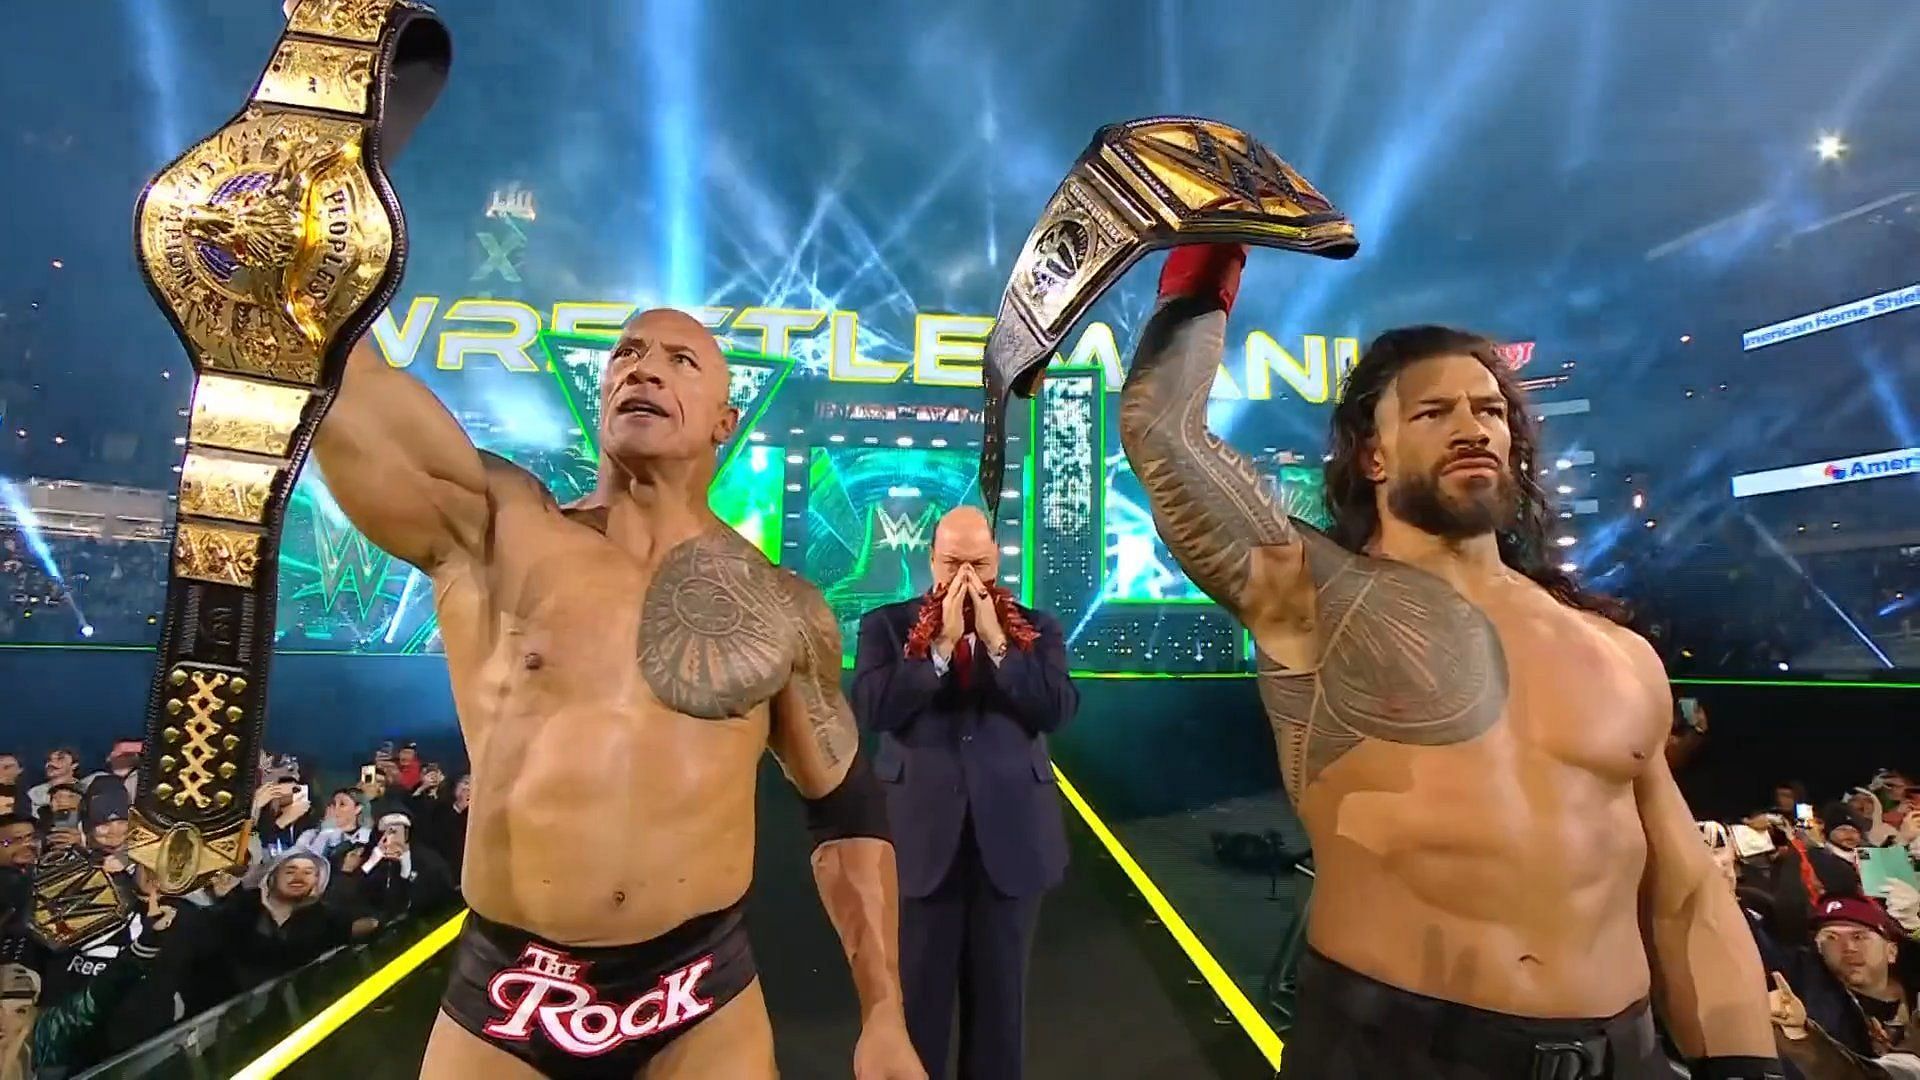 The Rock and Roman Reigns were victorious on Night One of WrestleMania 40